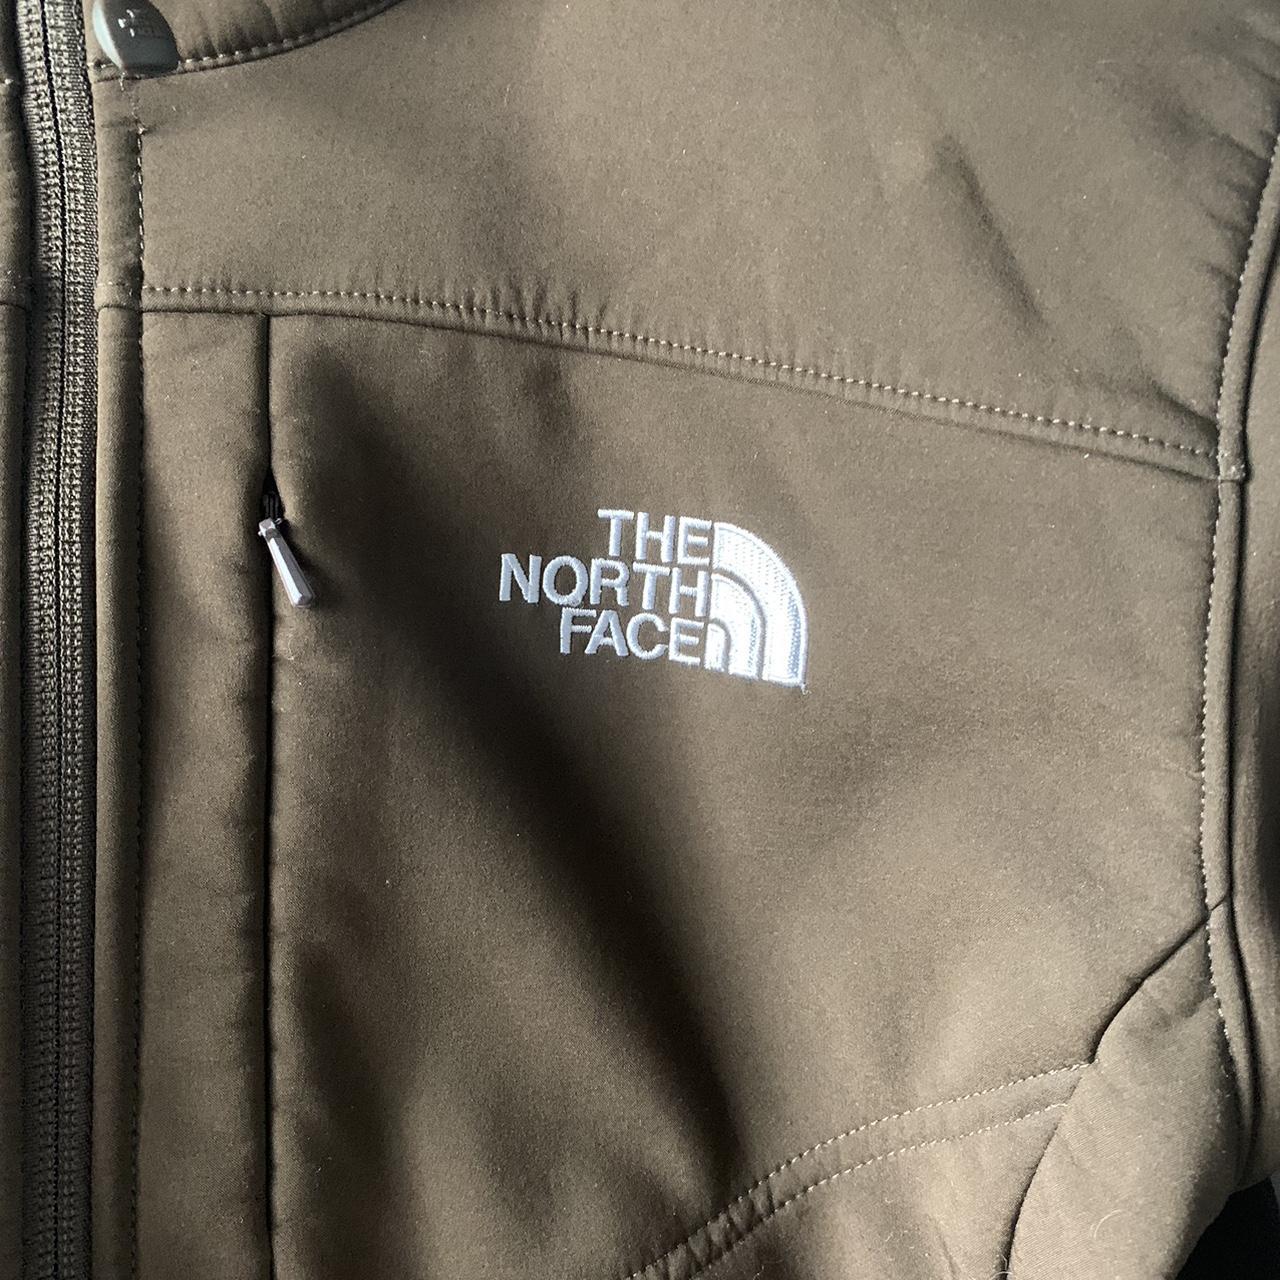 The North Face Women's Brown and White Jacket (2)